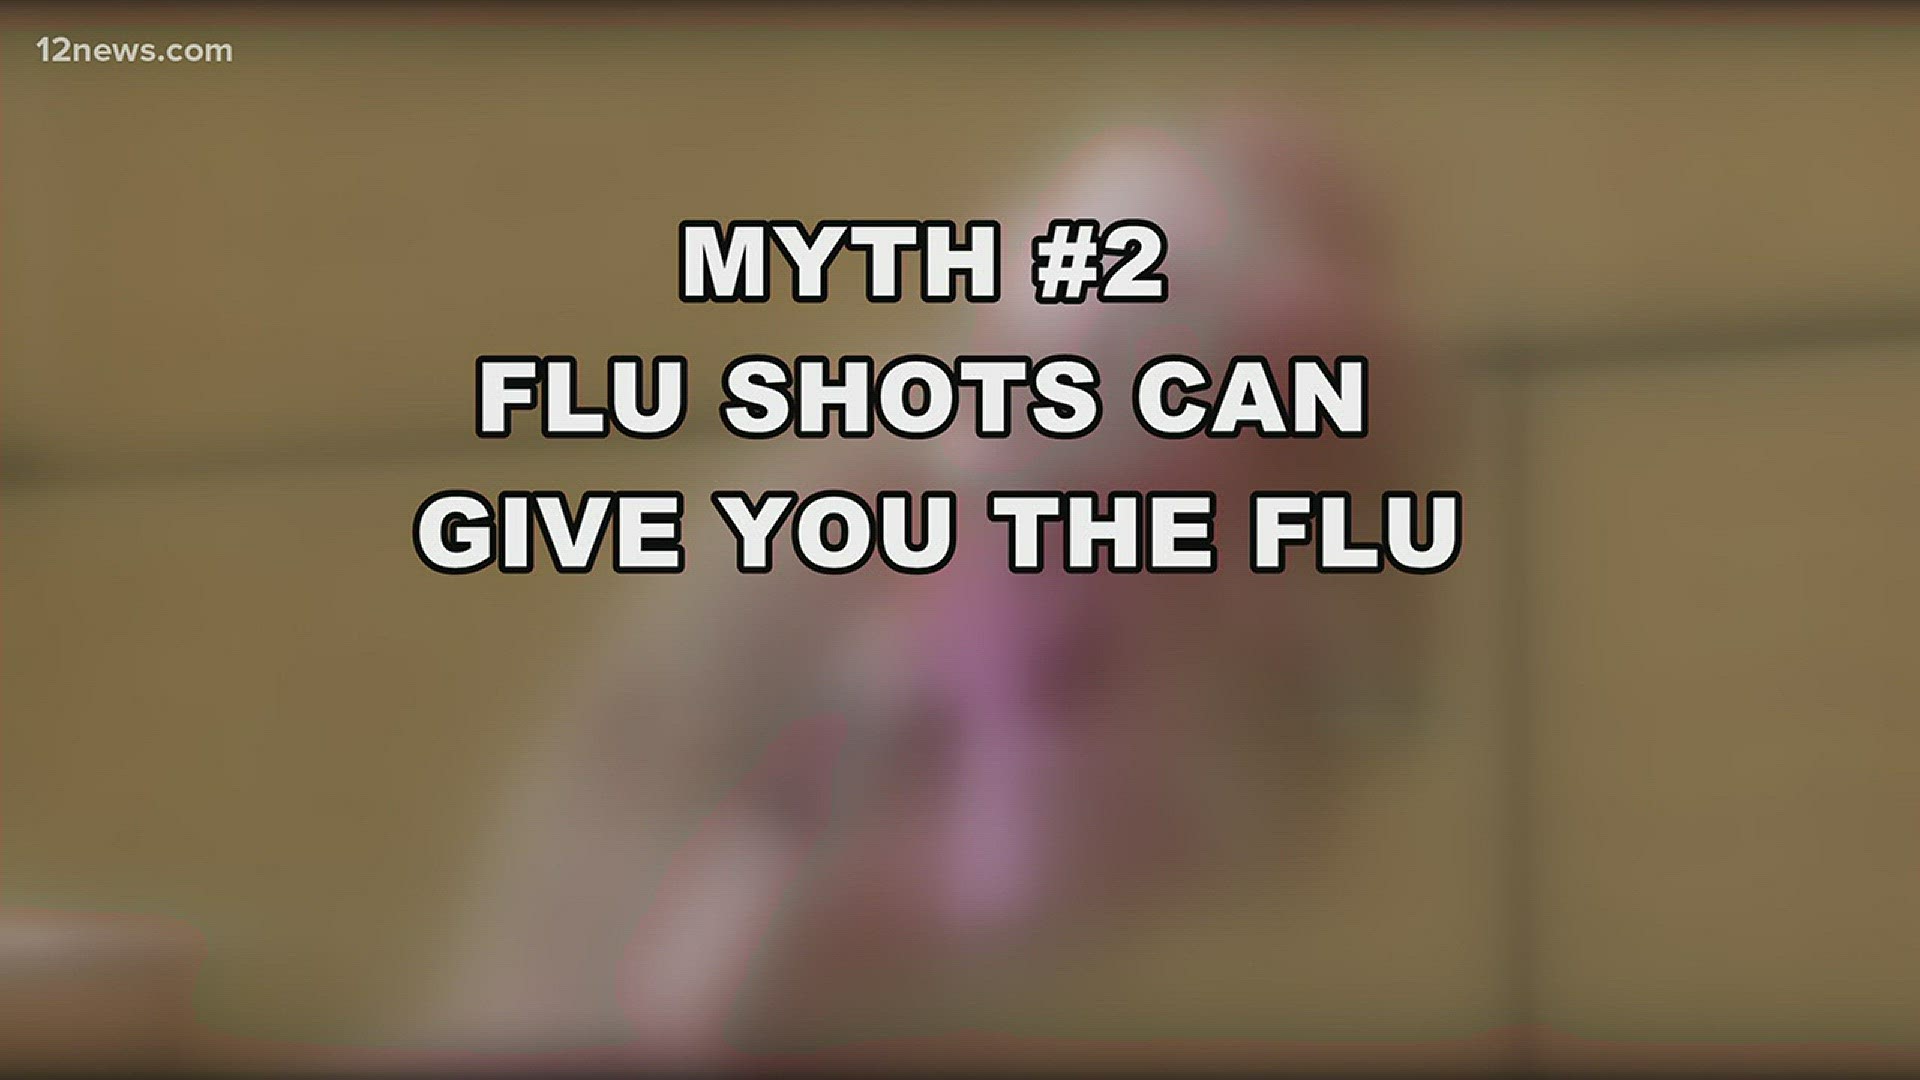 Five flu myths debunked by Dr. Frank Lovecchio from Banner Hospital.